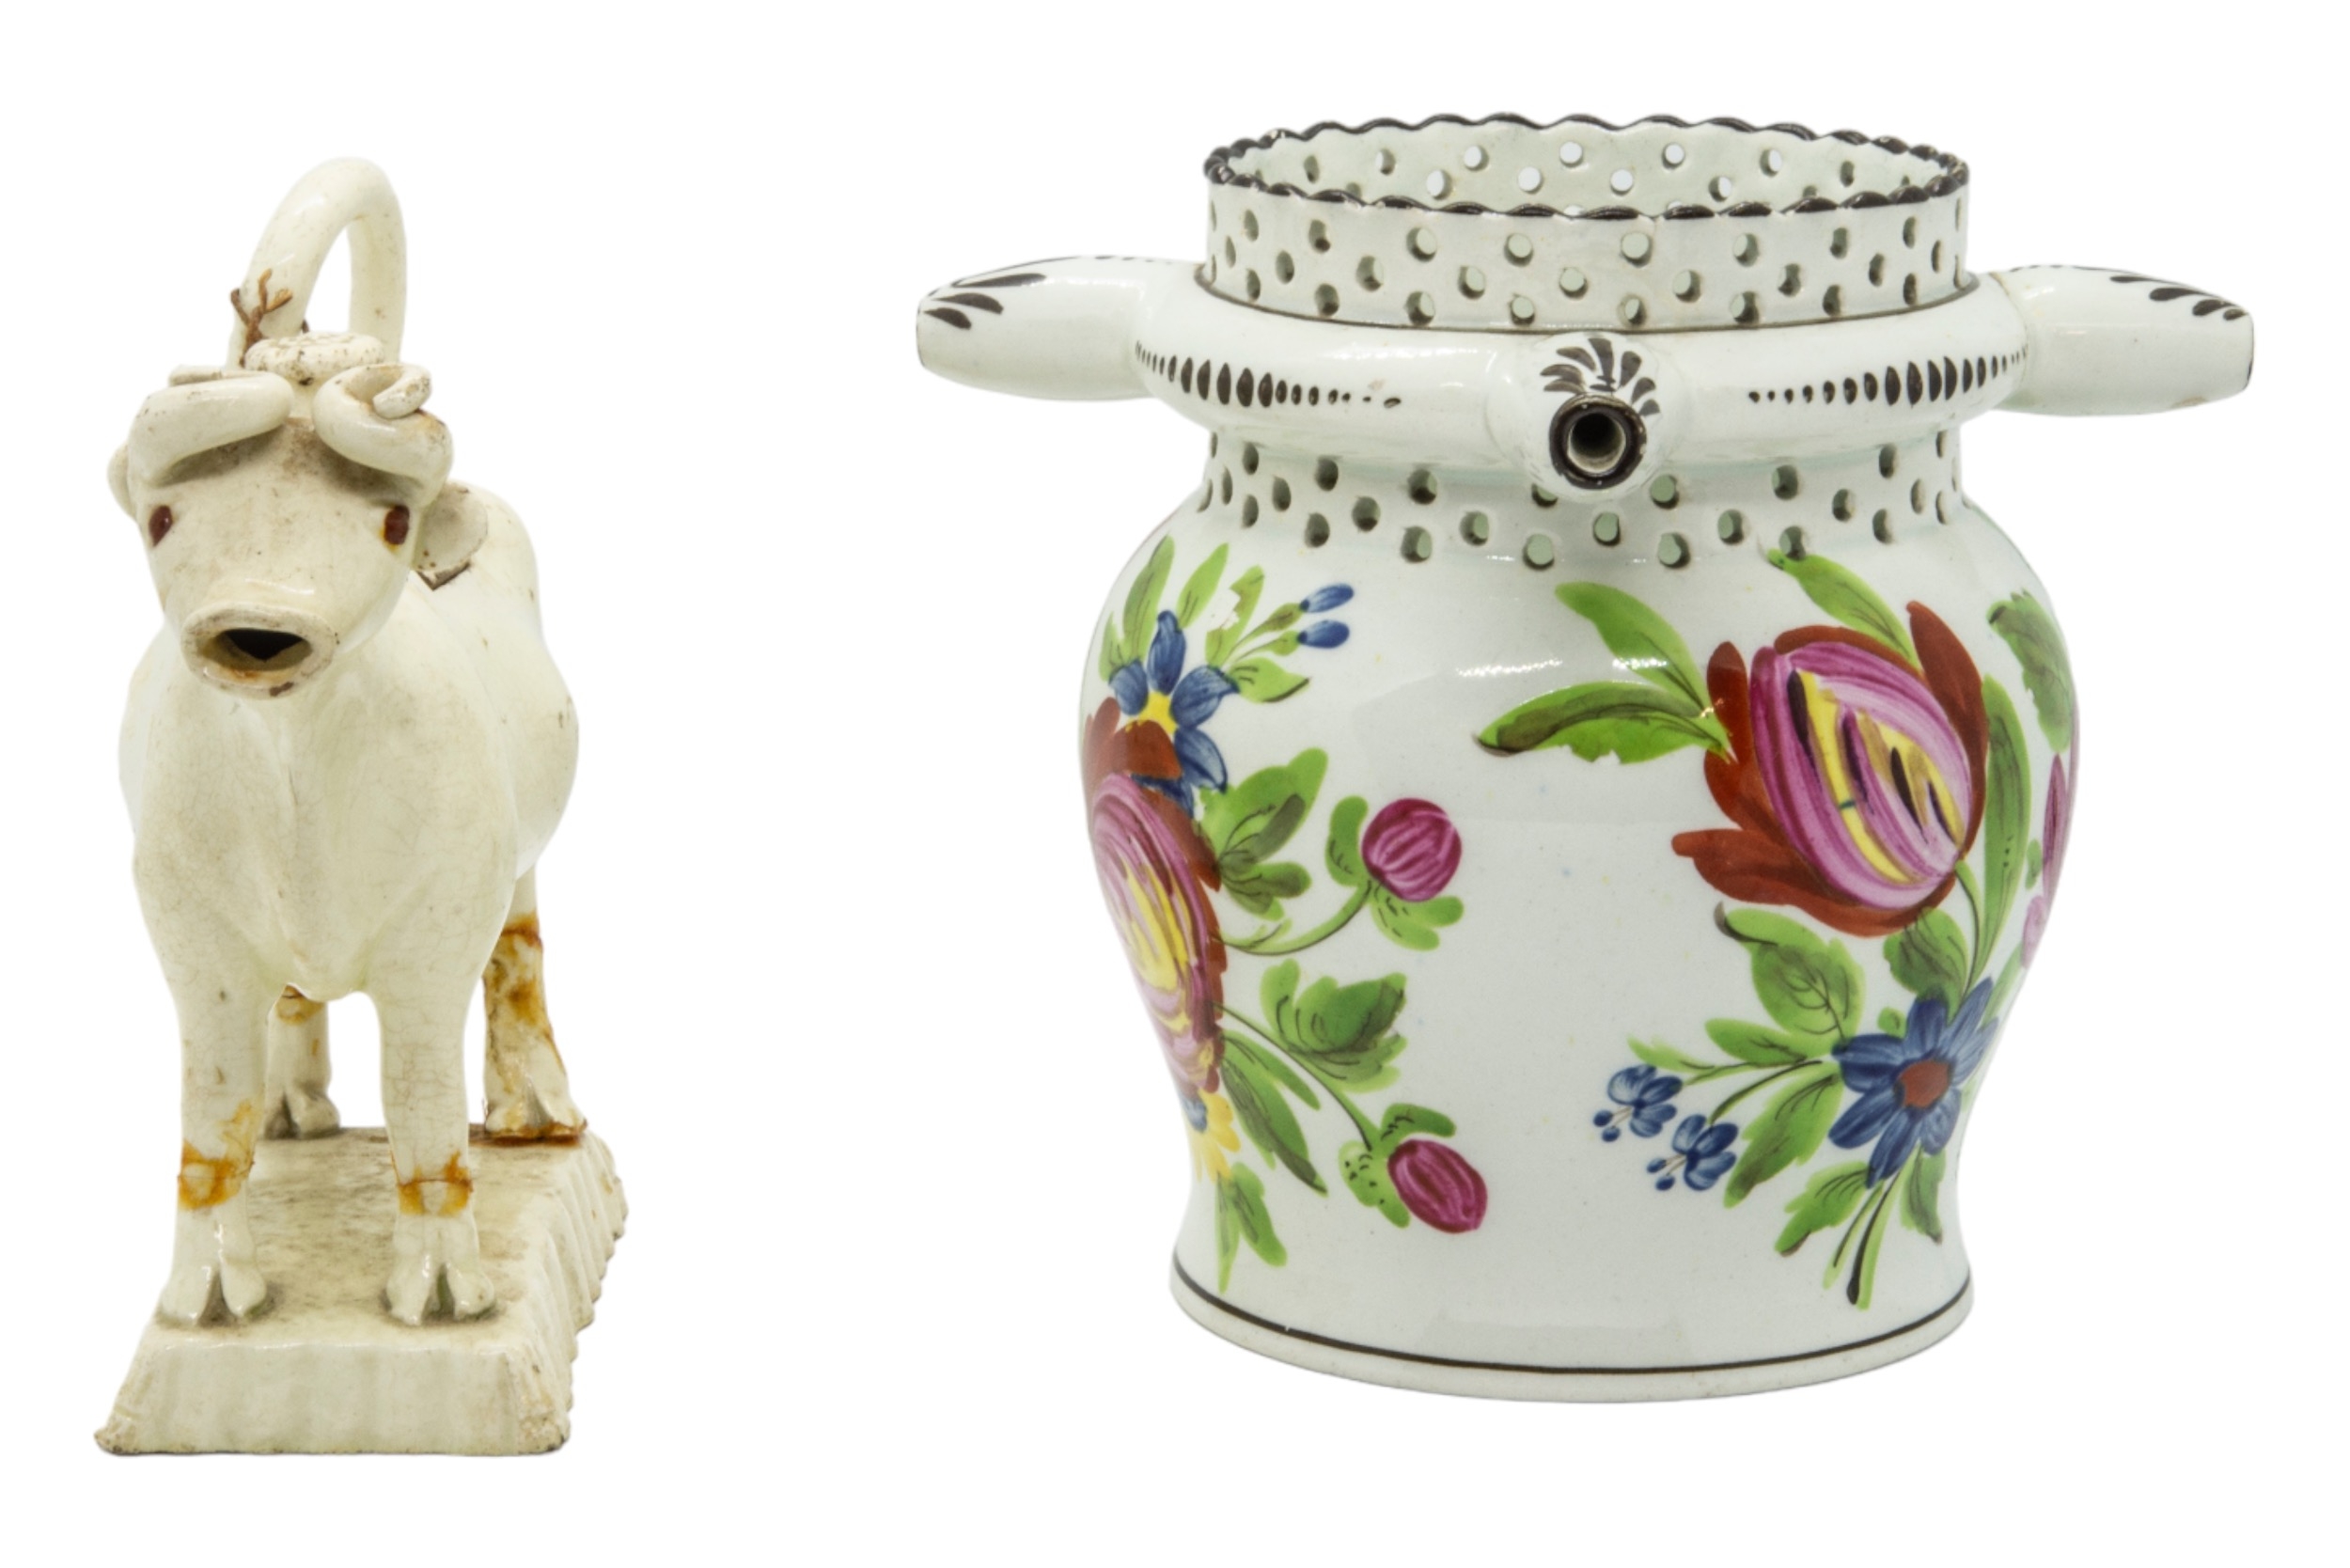 A WILLIAM FIFEILD BRISTOL PUZZLE JUG Circa 1830, together with creamware cow creamer, 12cms high - Image 2 of 4